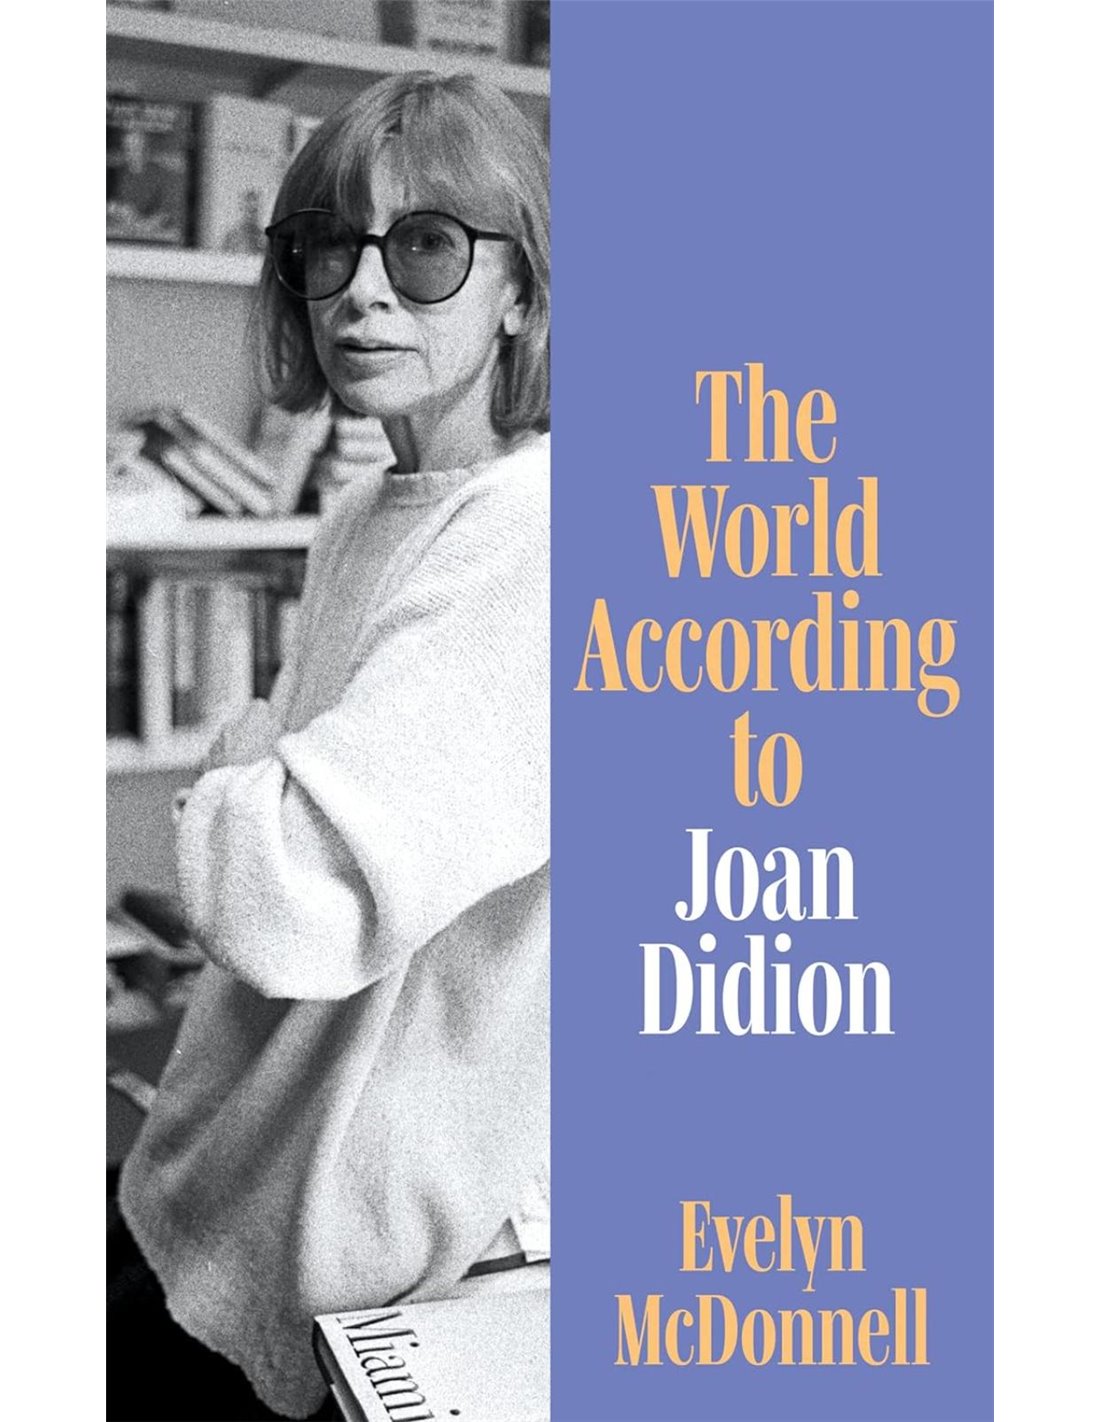 Joan Didion, Where She Was From - Sactown Magazine